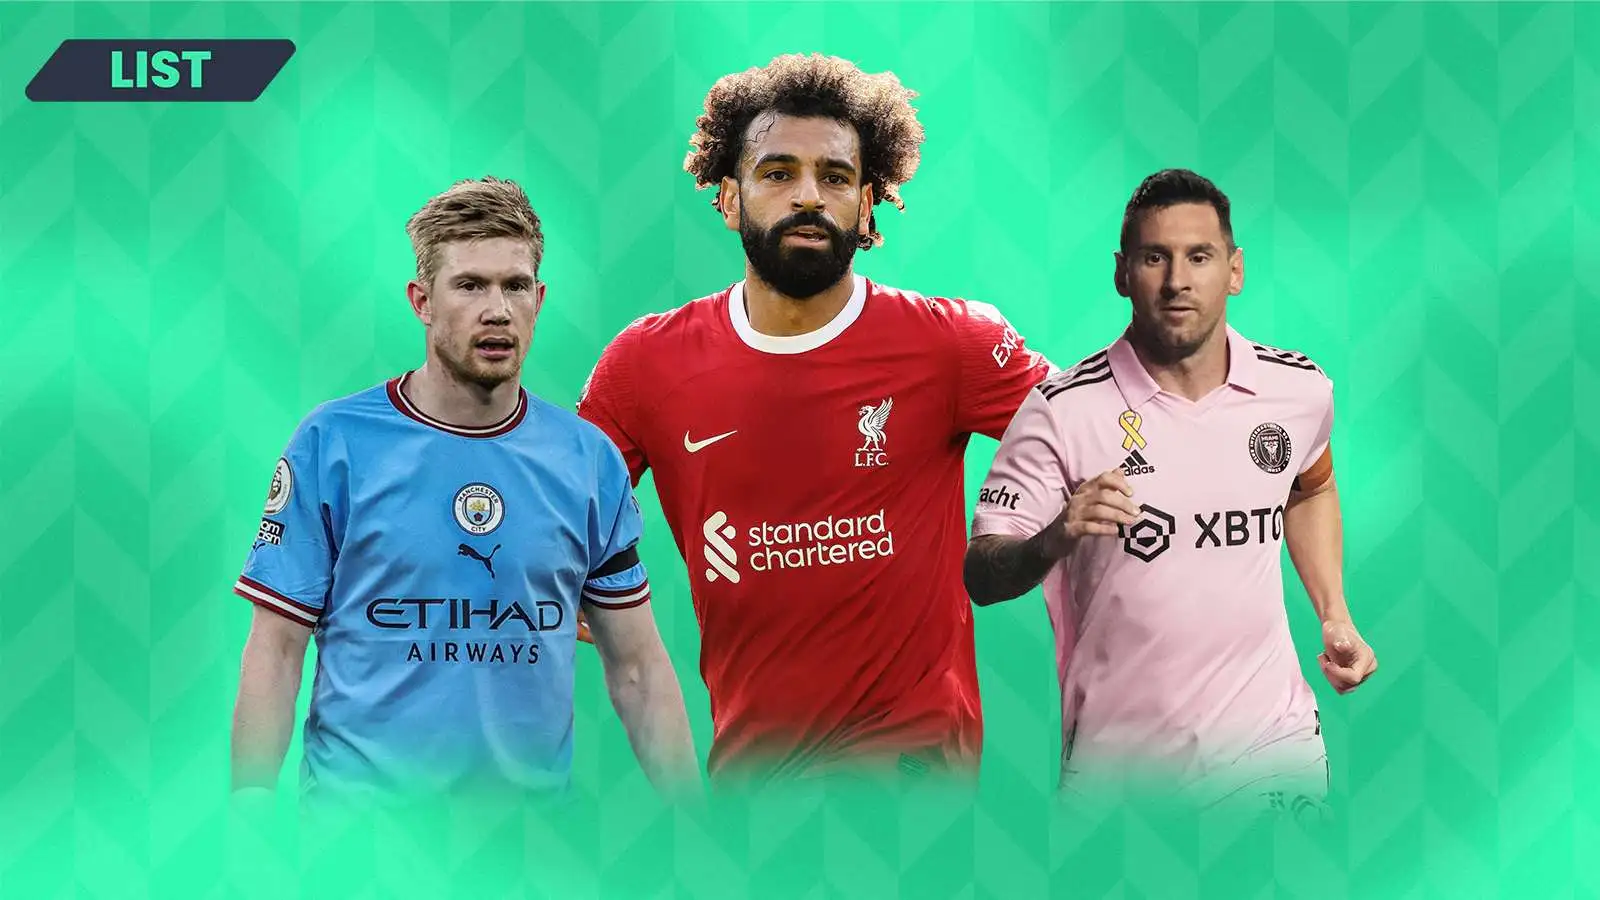 Kevin de Bruyne, Mo Salah and Lionel Messi are all out of contract in 2025